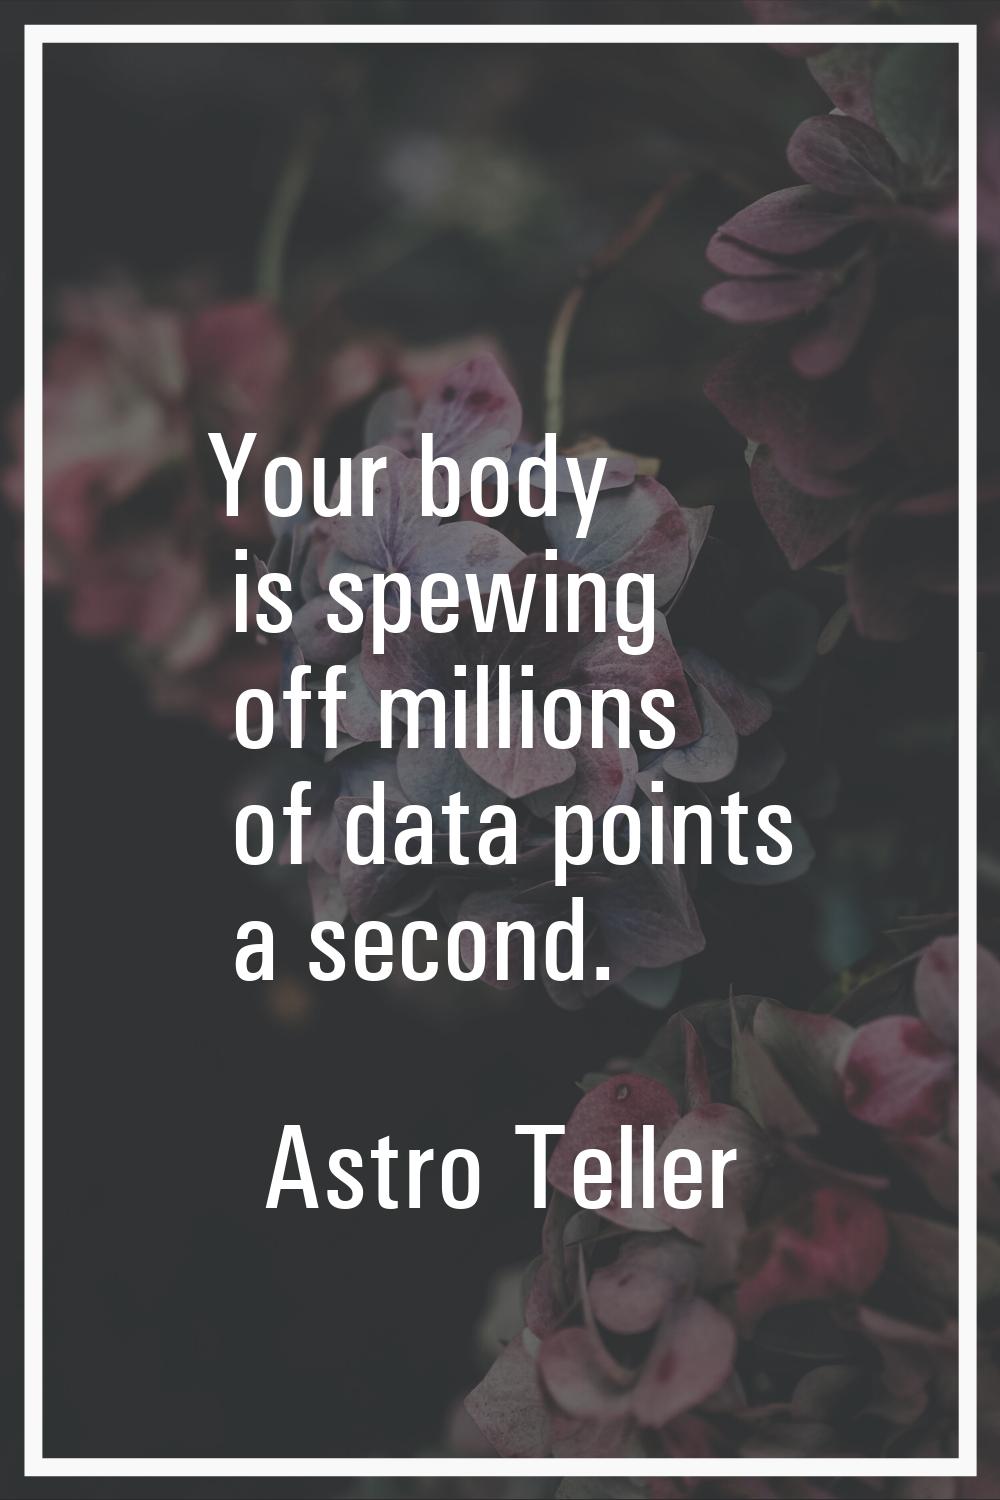 Your body is spewing off millions of data points a second.